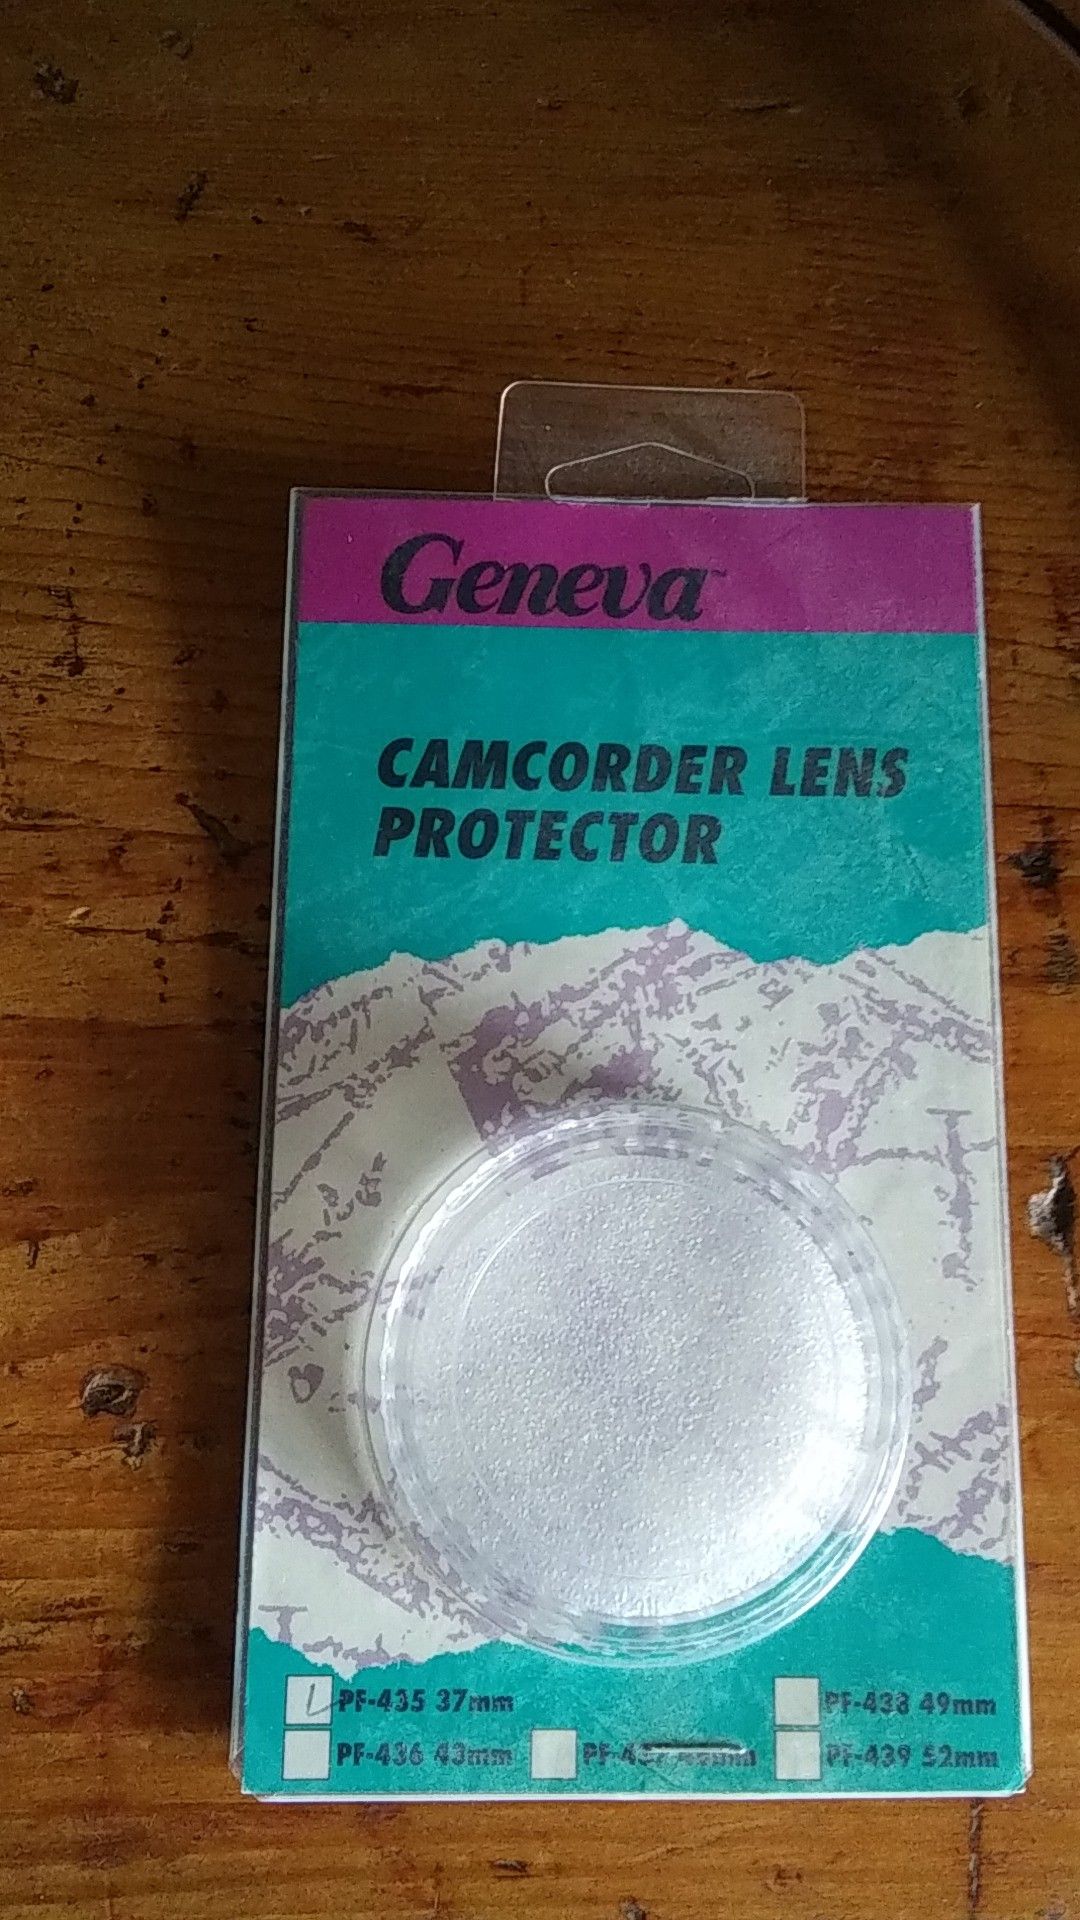 Camcorder Lens Protector